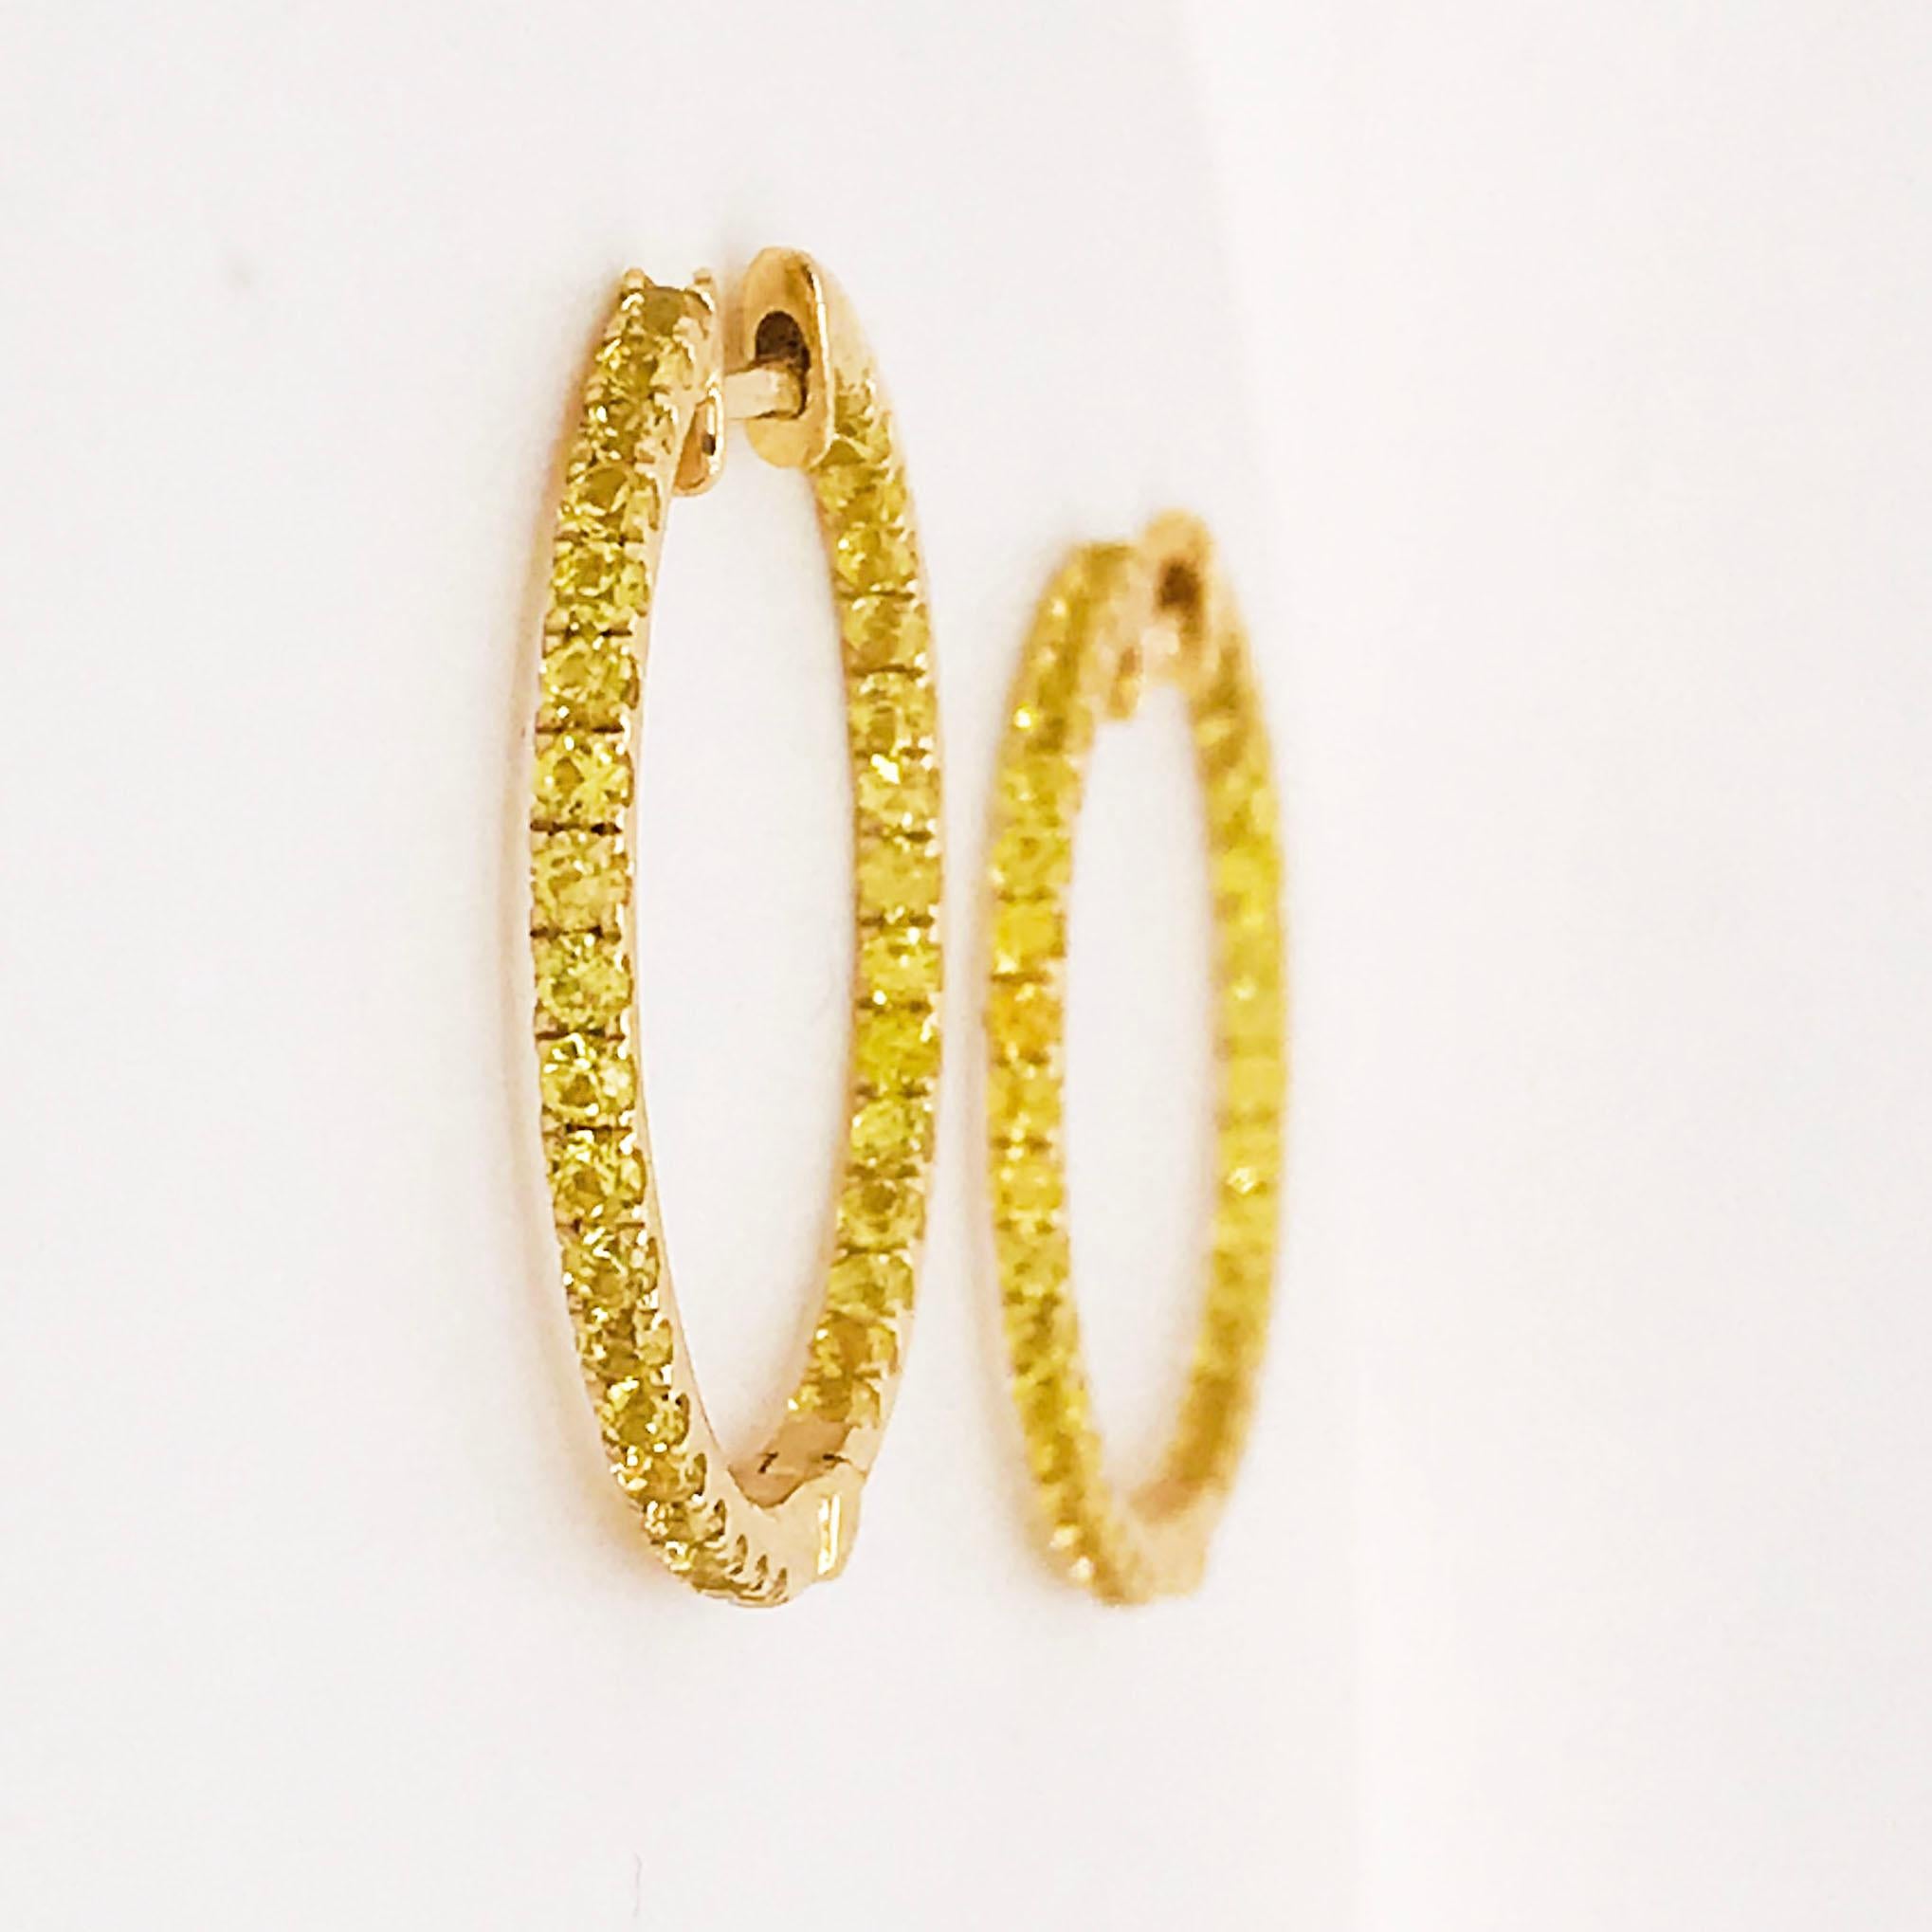 Yellow sapphire hoops are the modern hoop design of 2020! These bold hoops are made in 14 karat yellow gold with genuine, yellow sapphire gemstones. The hoop earrings have an inside-out design that allows the sapphires to be seen from the front as